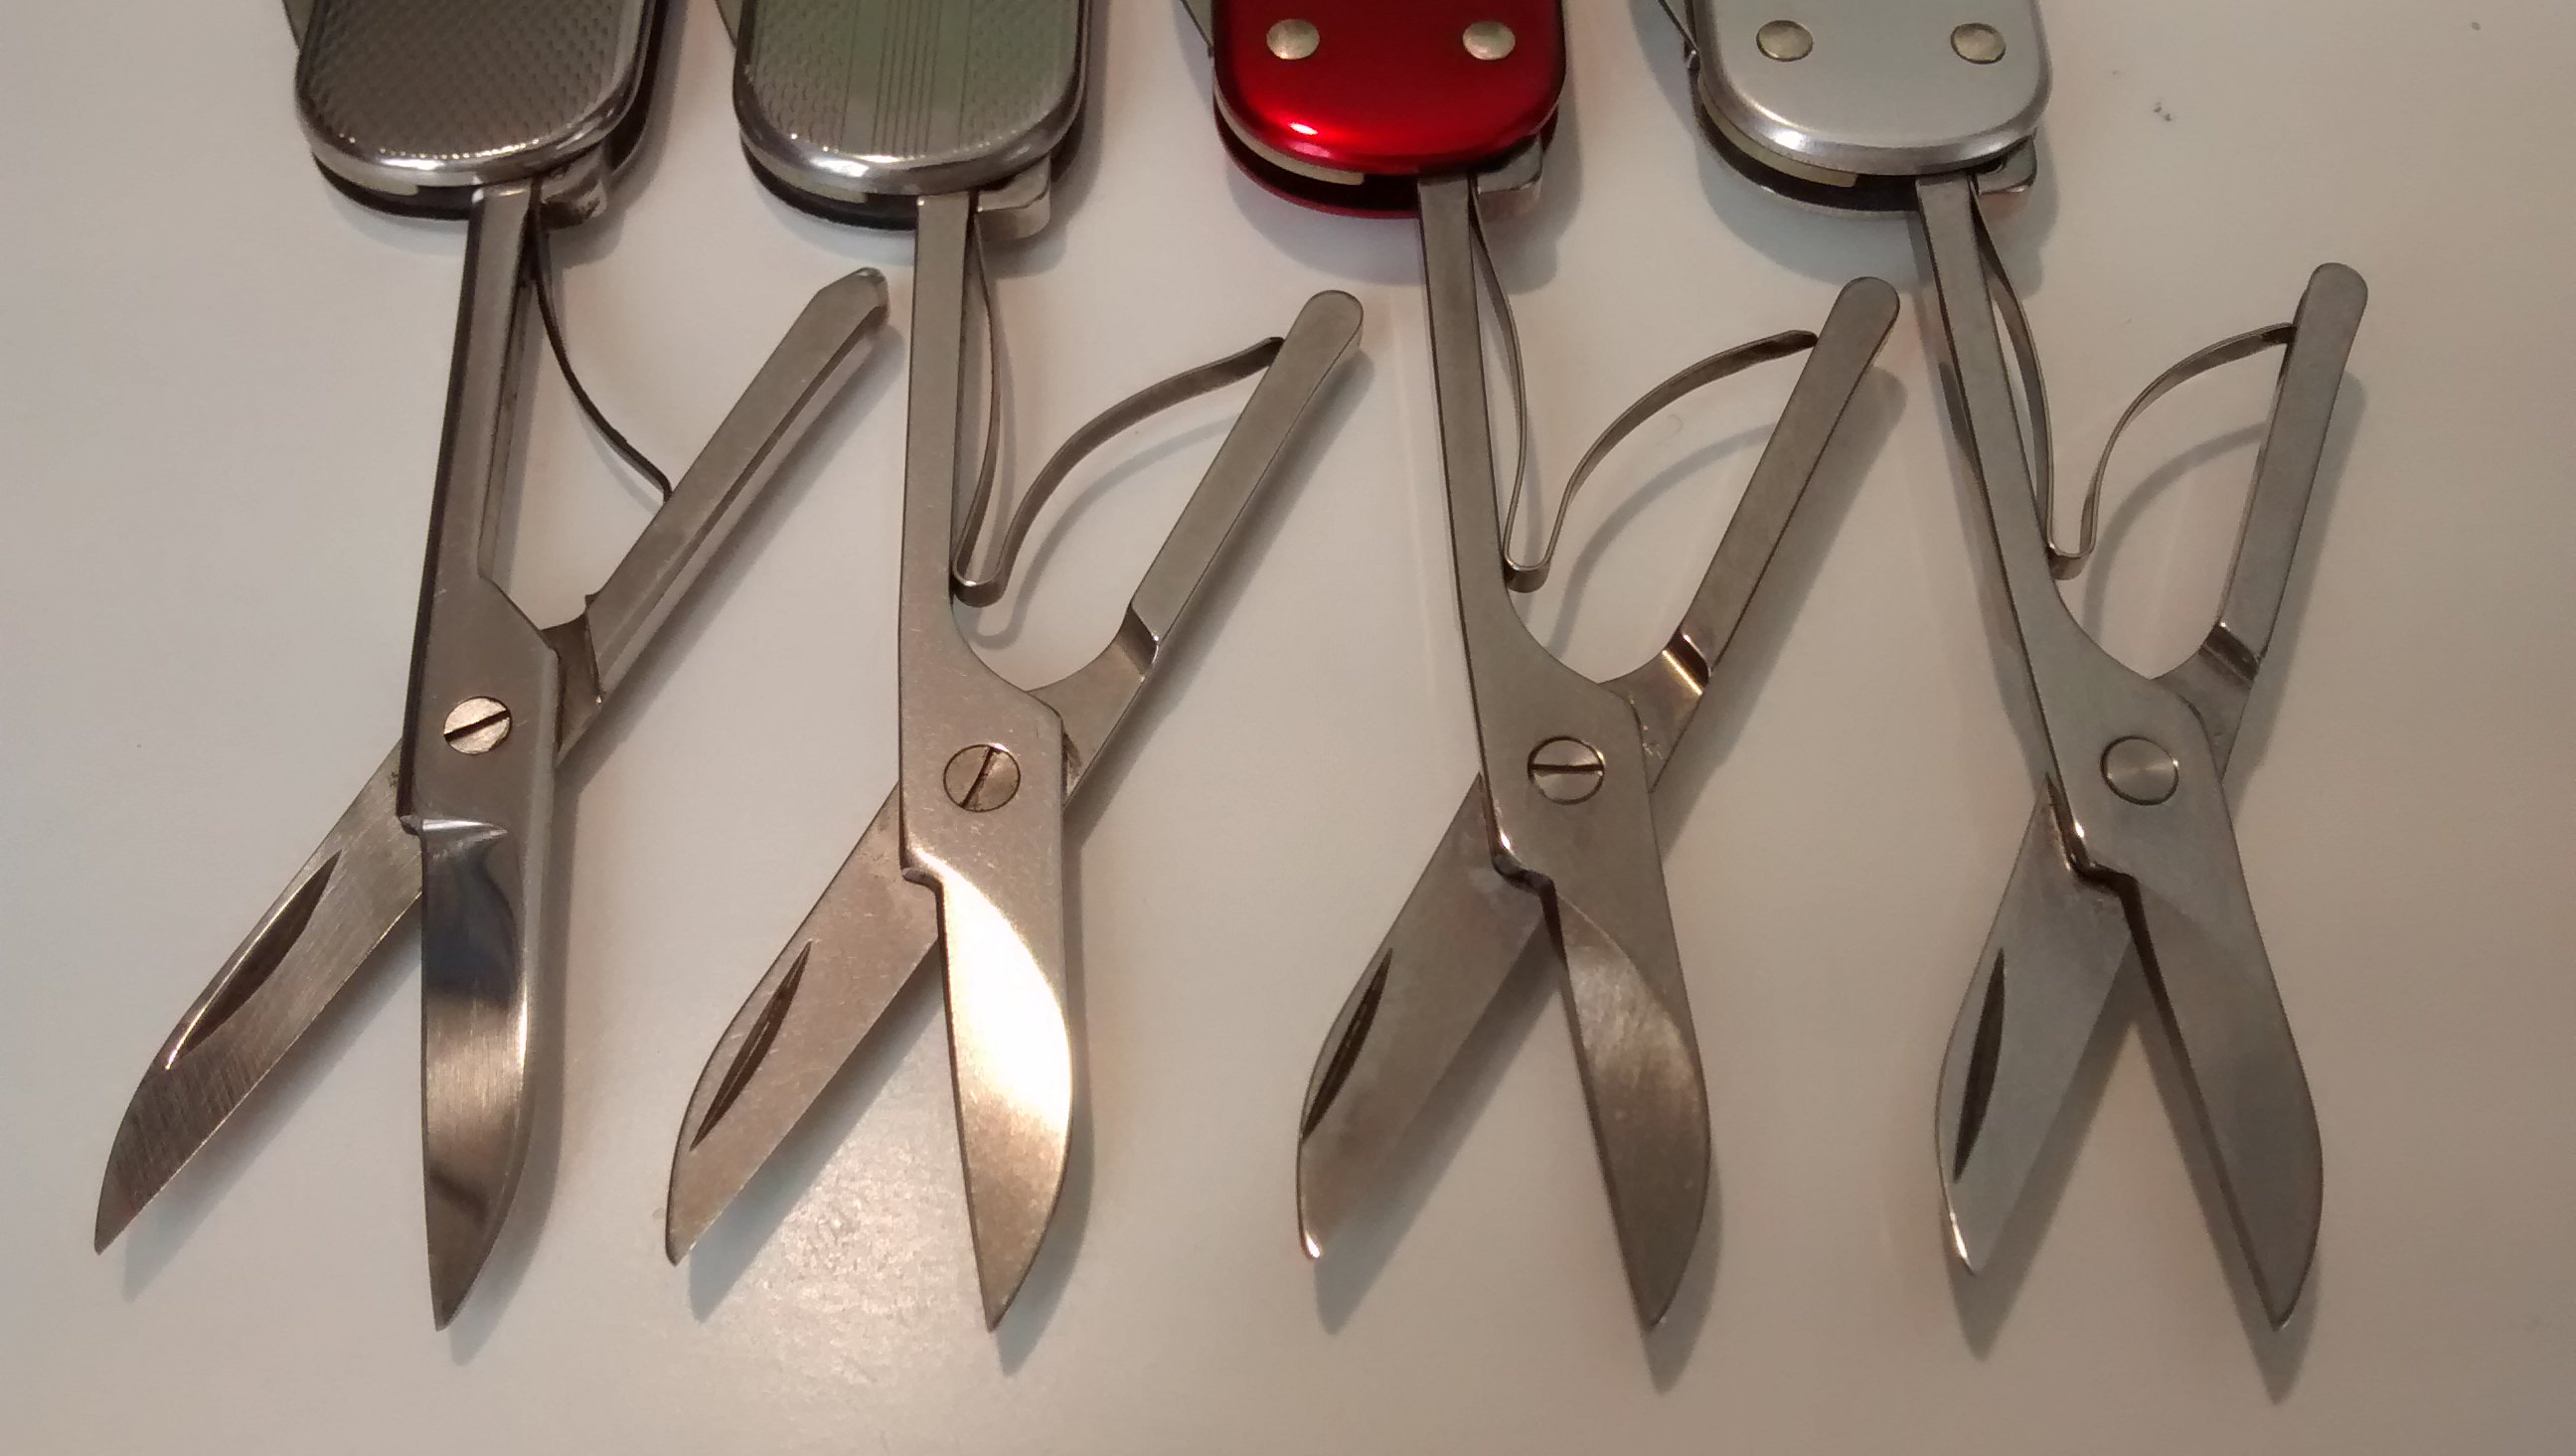 74mm Scissors Evolution - Approximate Dating L to R: Pre-1975, 1975-1990, 1990-1991, 1991-2007